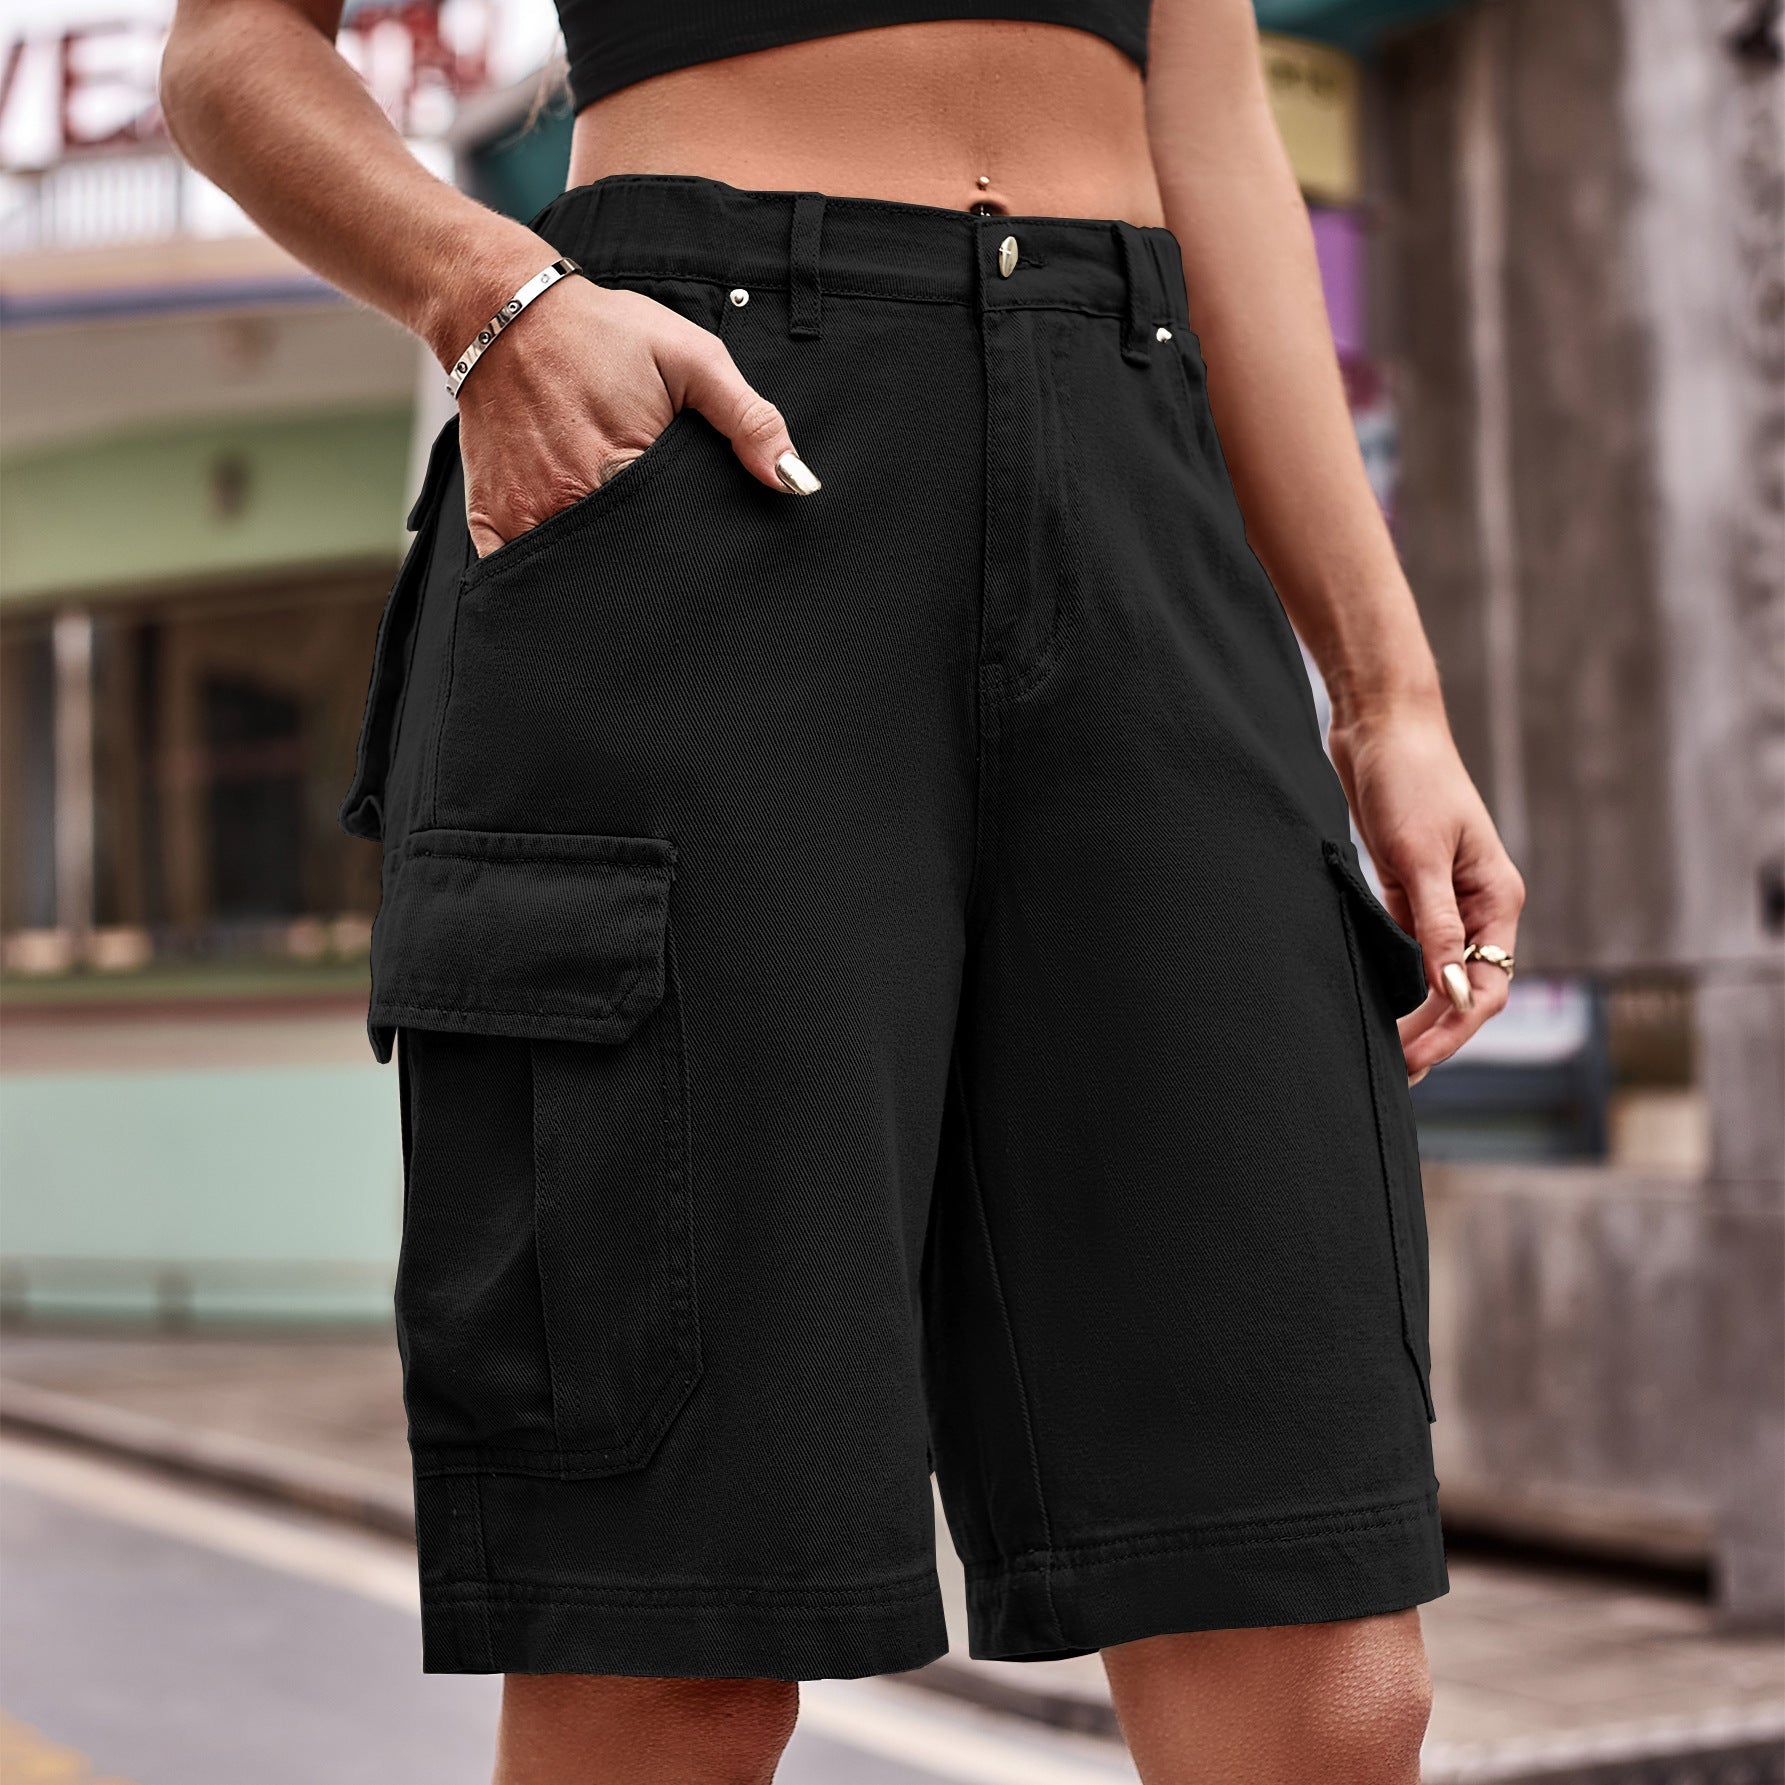 Denim Cargo Shorts with Pockets - Black / S - Women’s Clothing & Accessories - Shorts - 19 - 2024